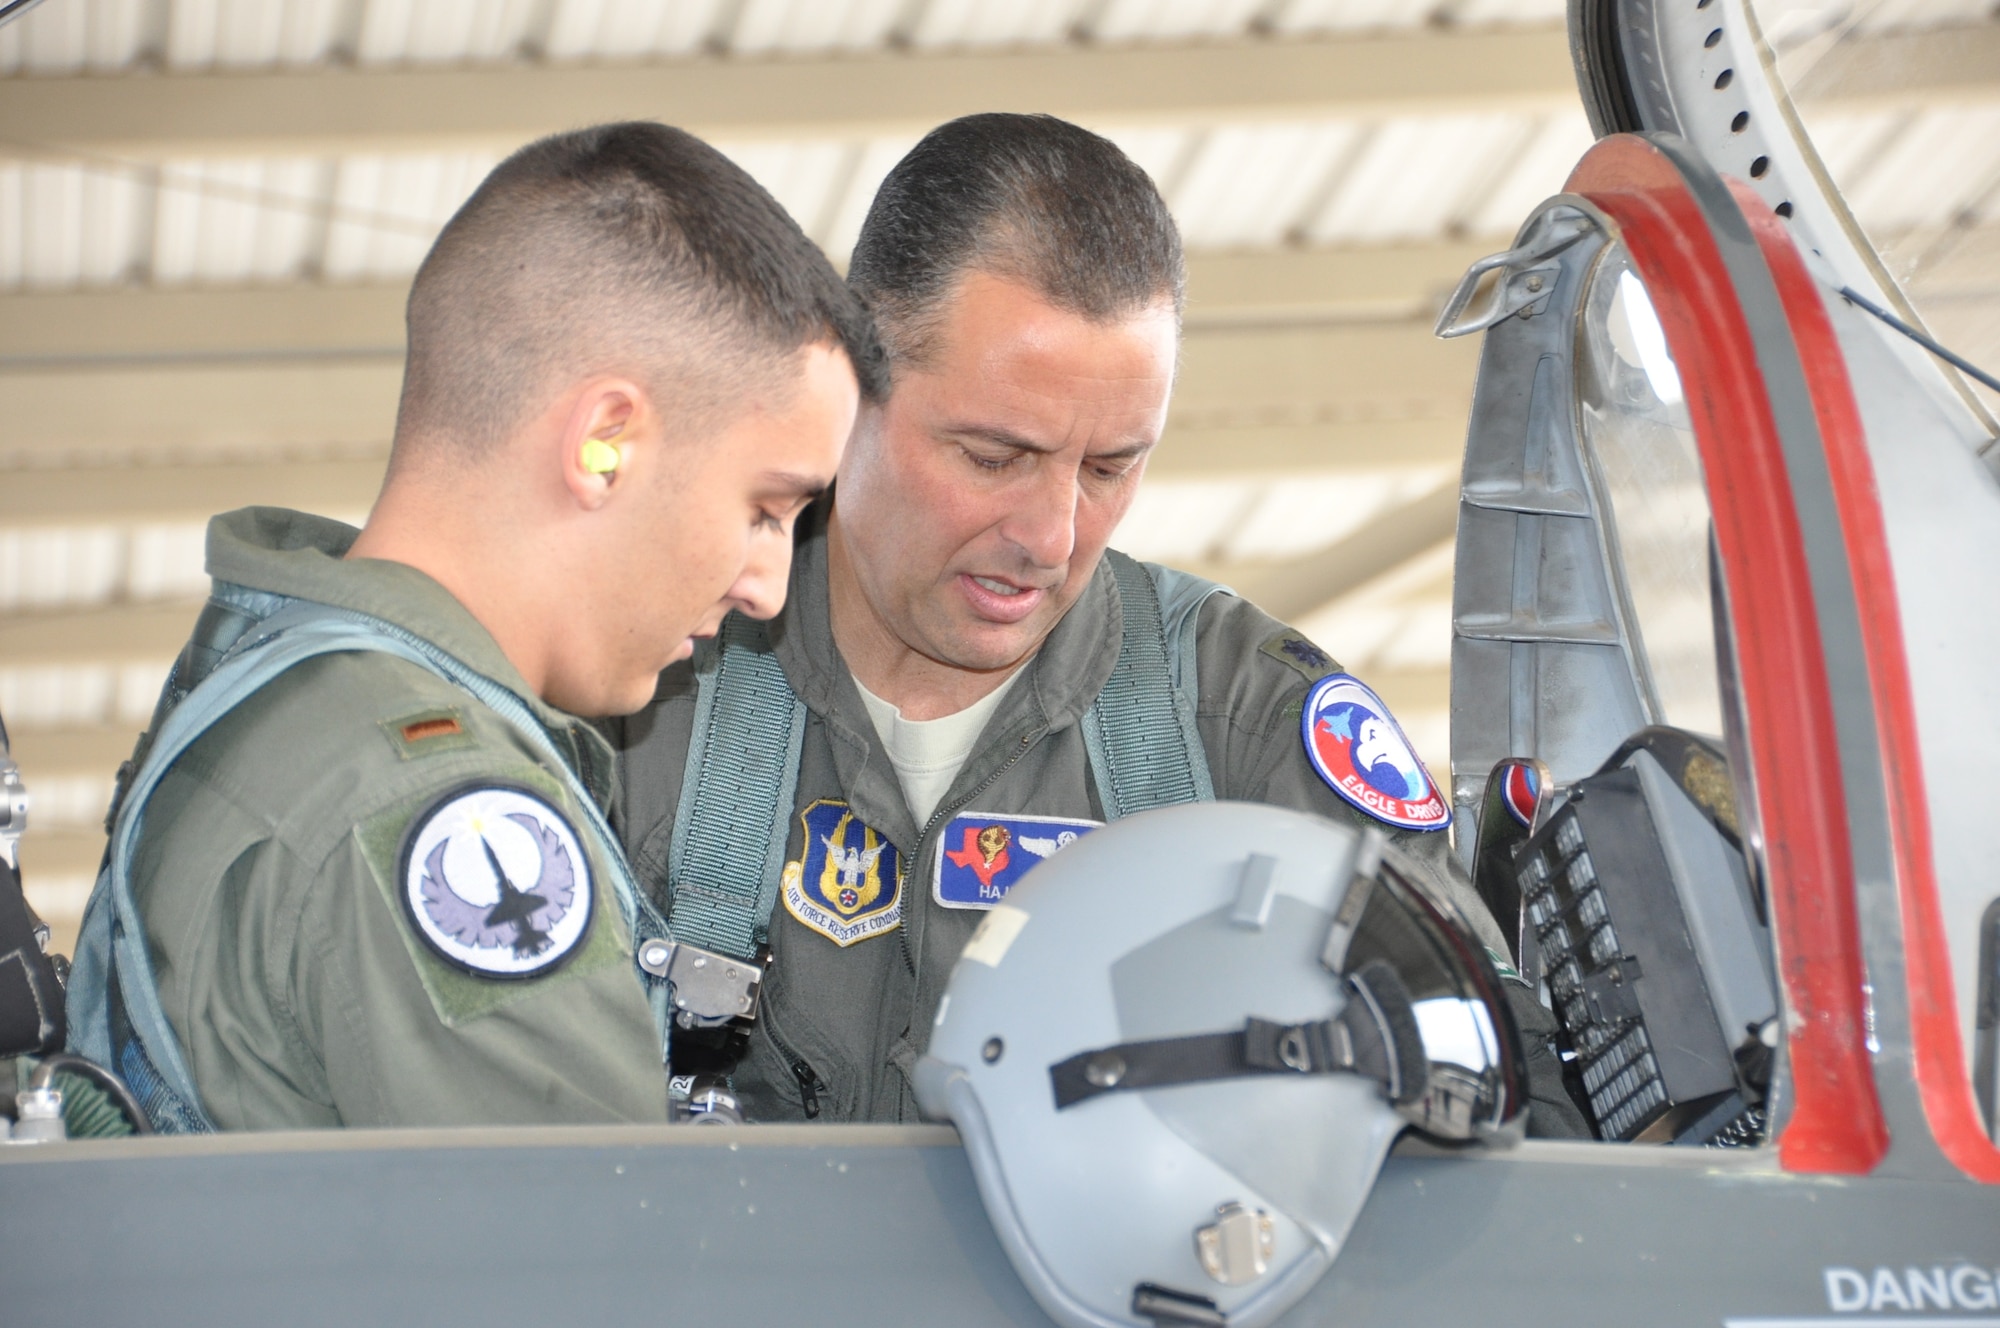 Lt. Col. Joe Mirarchi, mission commander, checks to ensure 2nd Lt. Chris Mirarchi is correctly situated in the aircraft prior to the lieutenant colonel’s fini flight, and the lieutenant’s first Air Force sortie. (U.S. Air Force photo by Debbie Gildea)